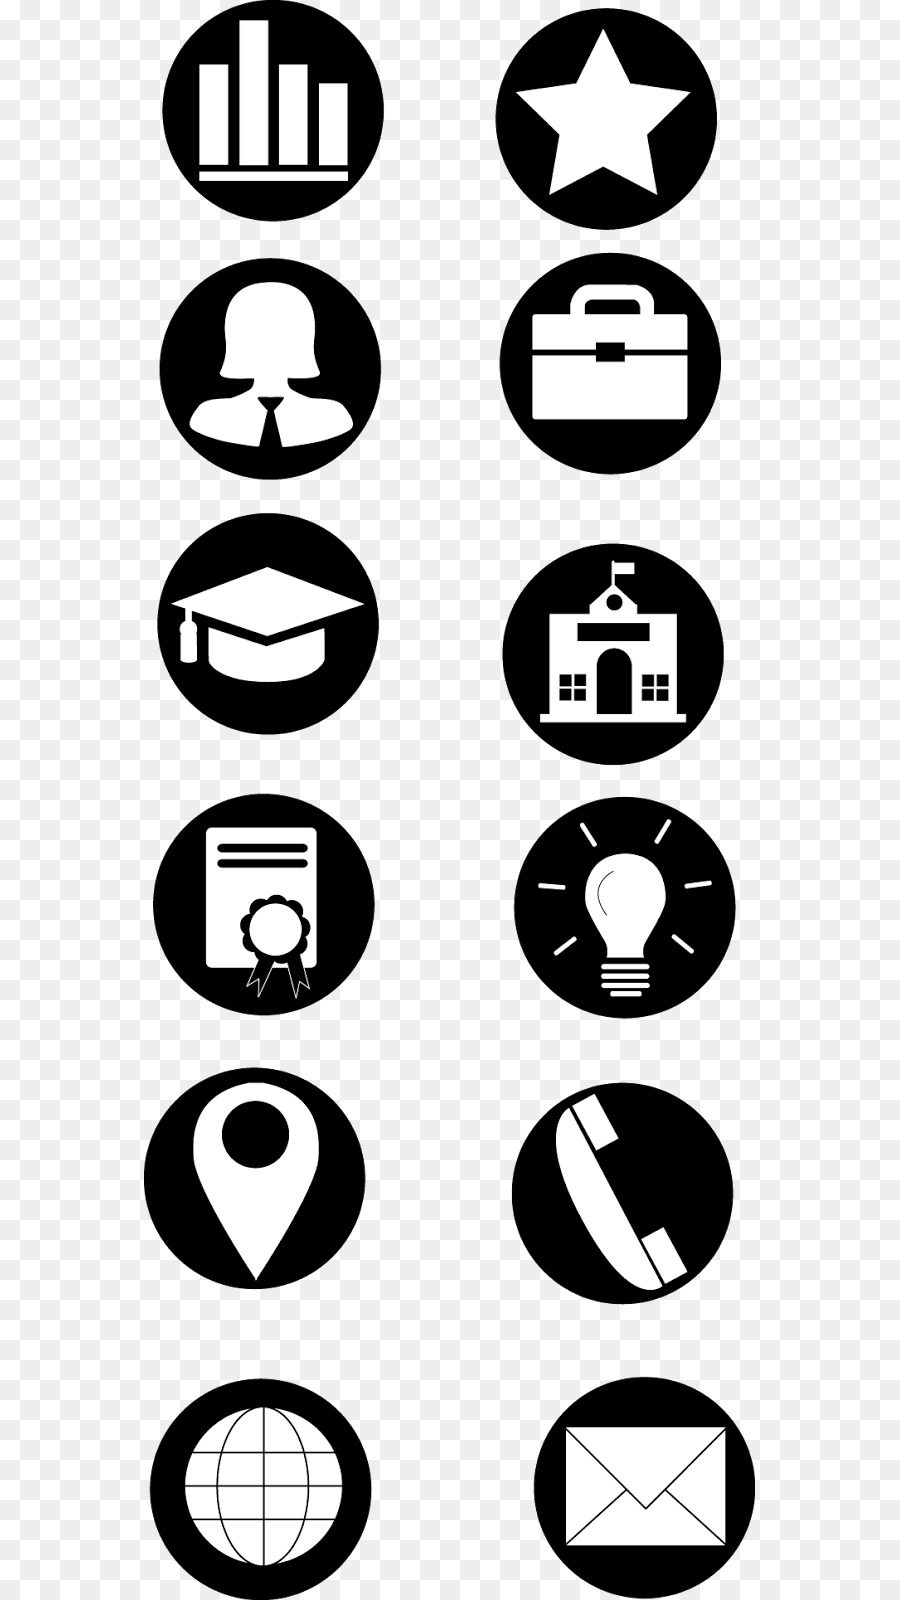 Computer Icons Curriculum Vitae Symbol Application For Employment